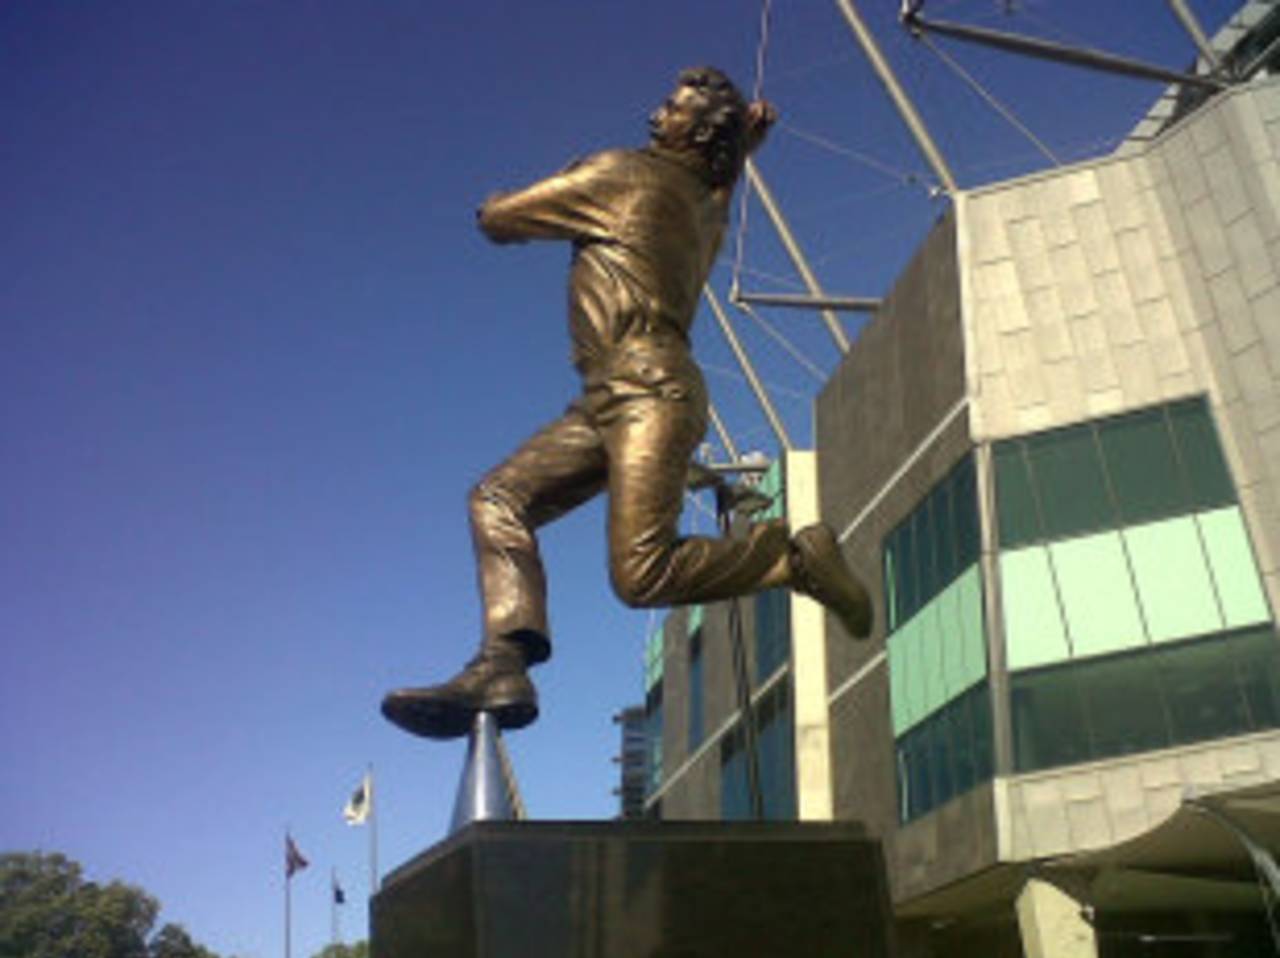 The statue of Dennis Lillee outside the Melbourne Cricket Ground, November 2012